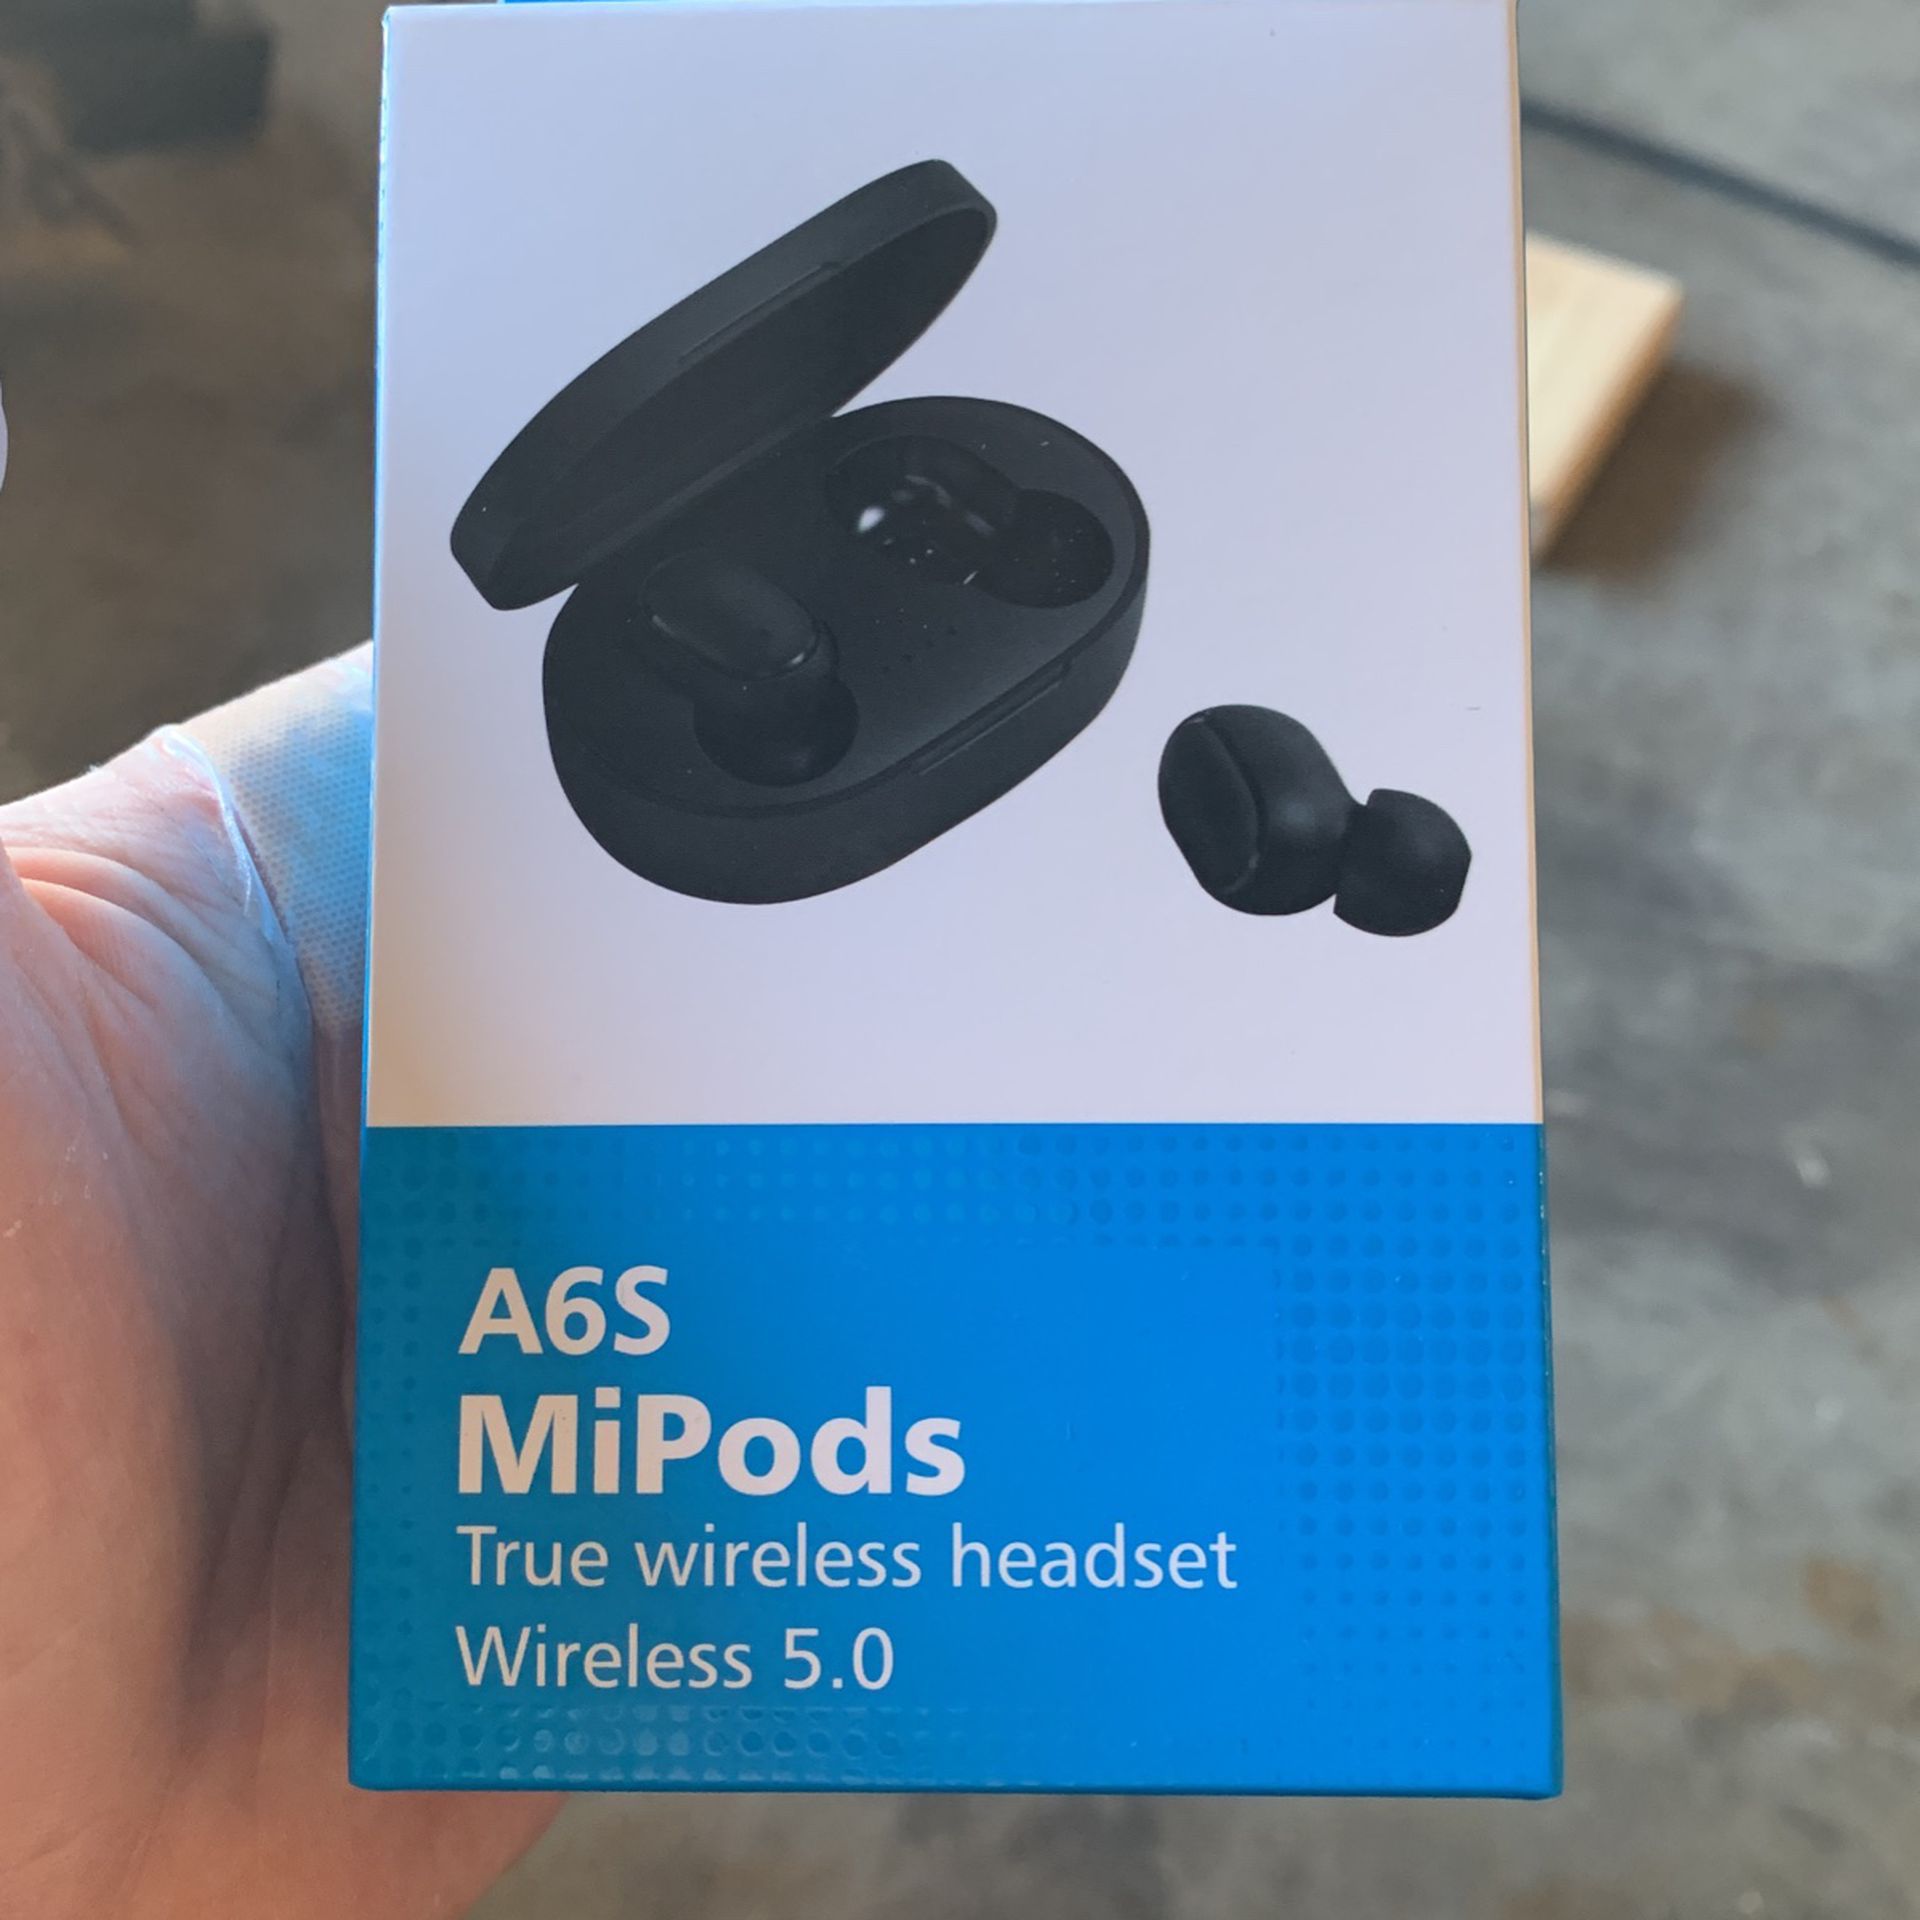 A6S MiPods brand new unopened box 9 Left